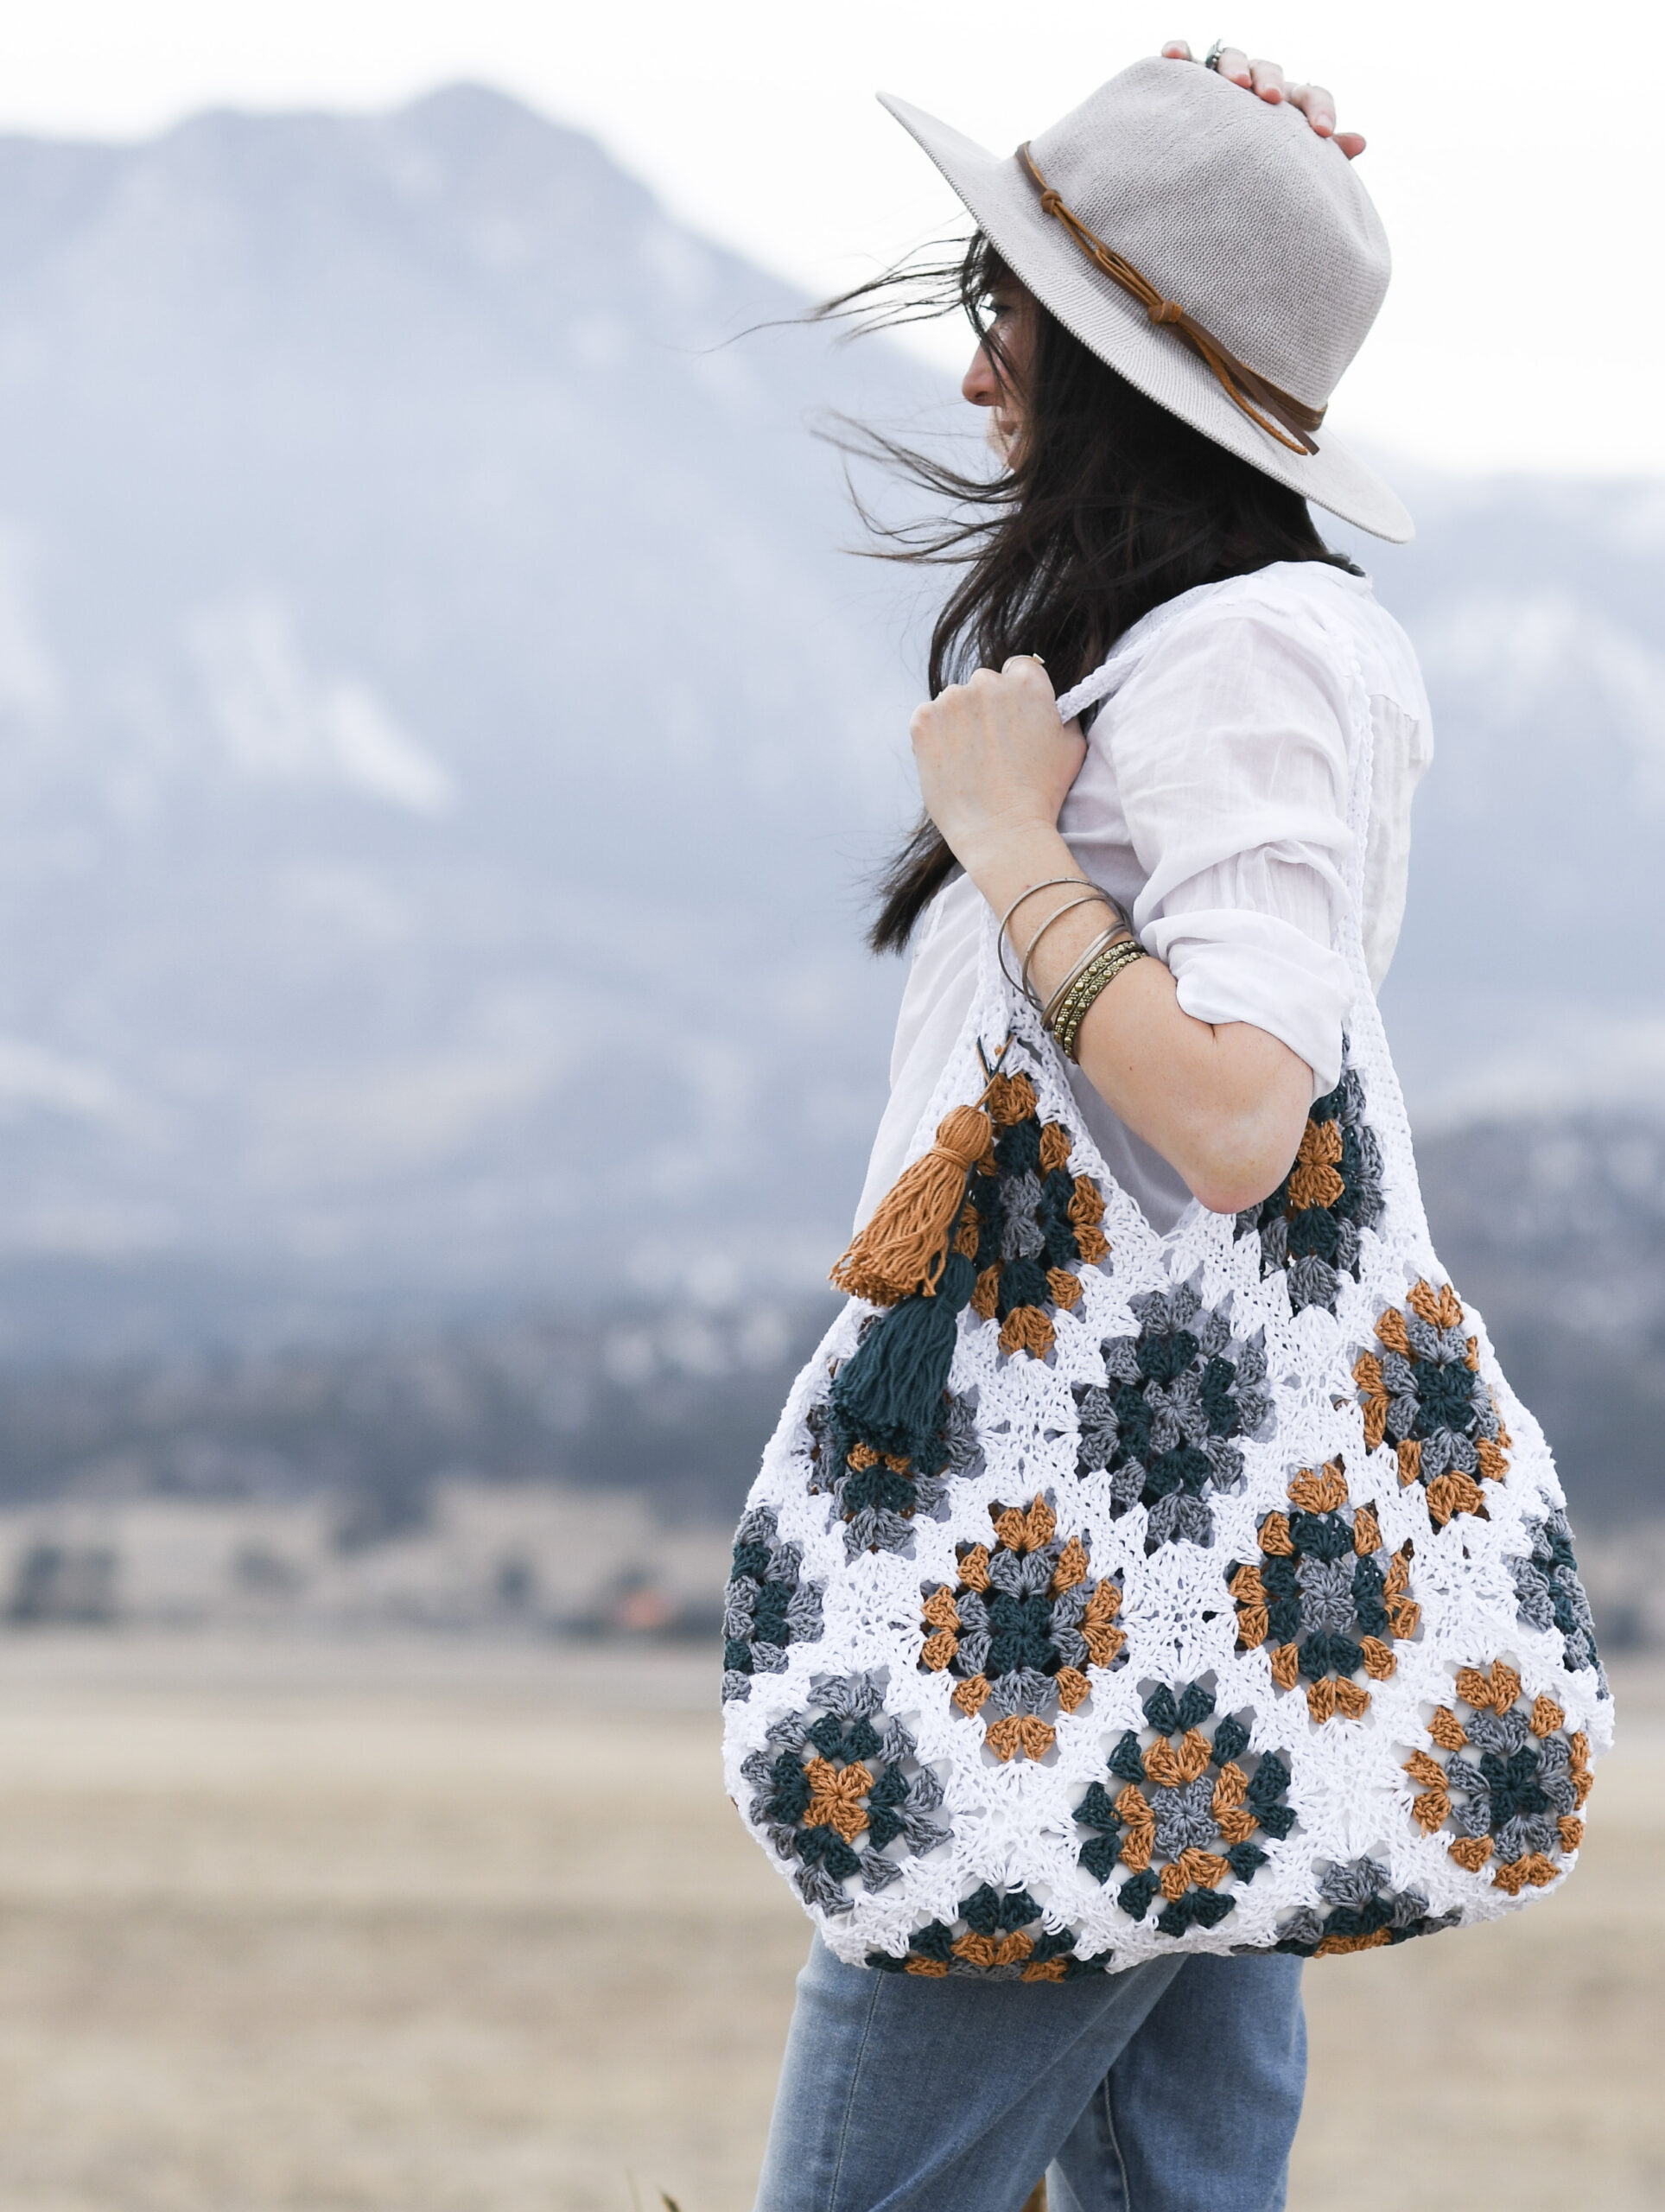 Easy Granny Square Tote Bag (with lining!) FREE pattern - Pukapuka